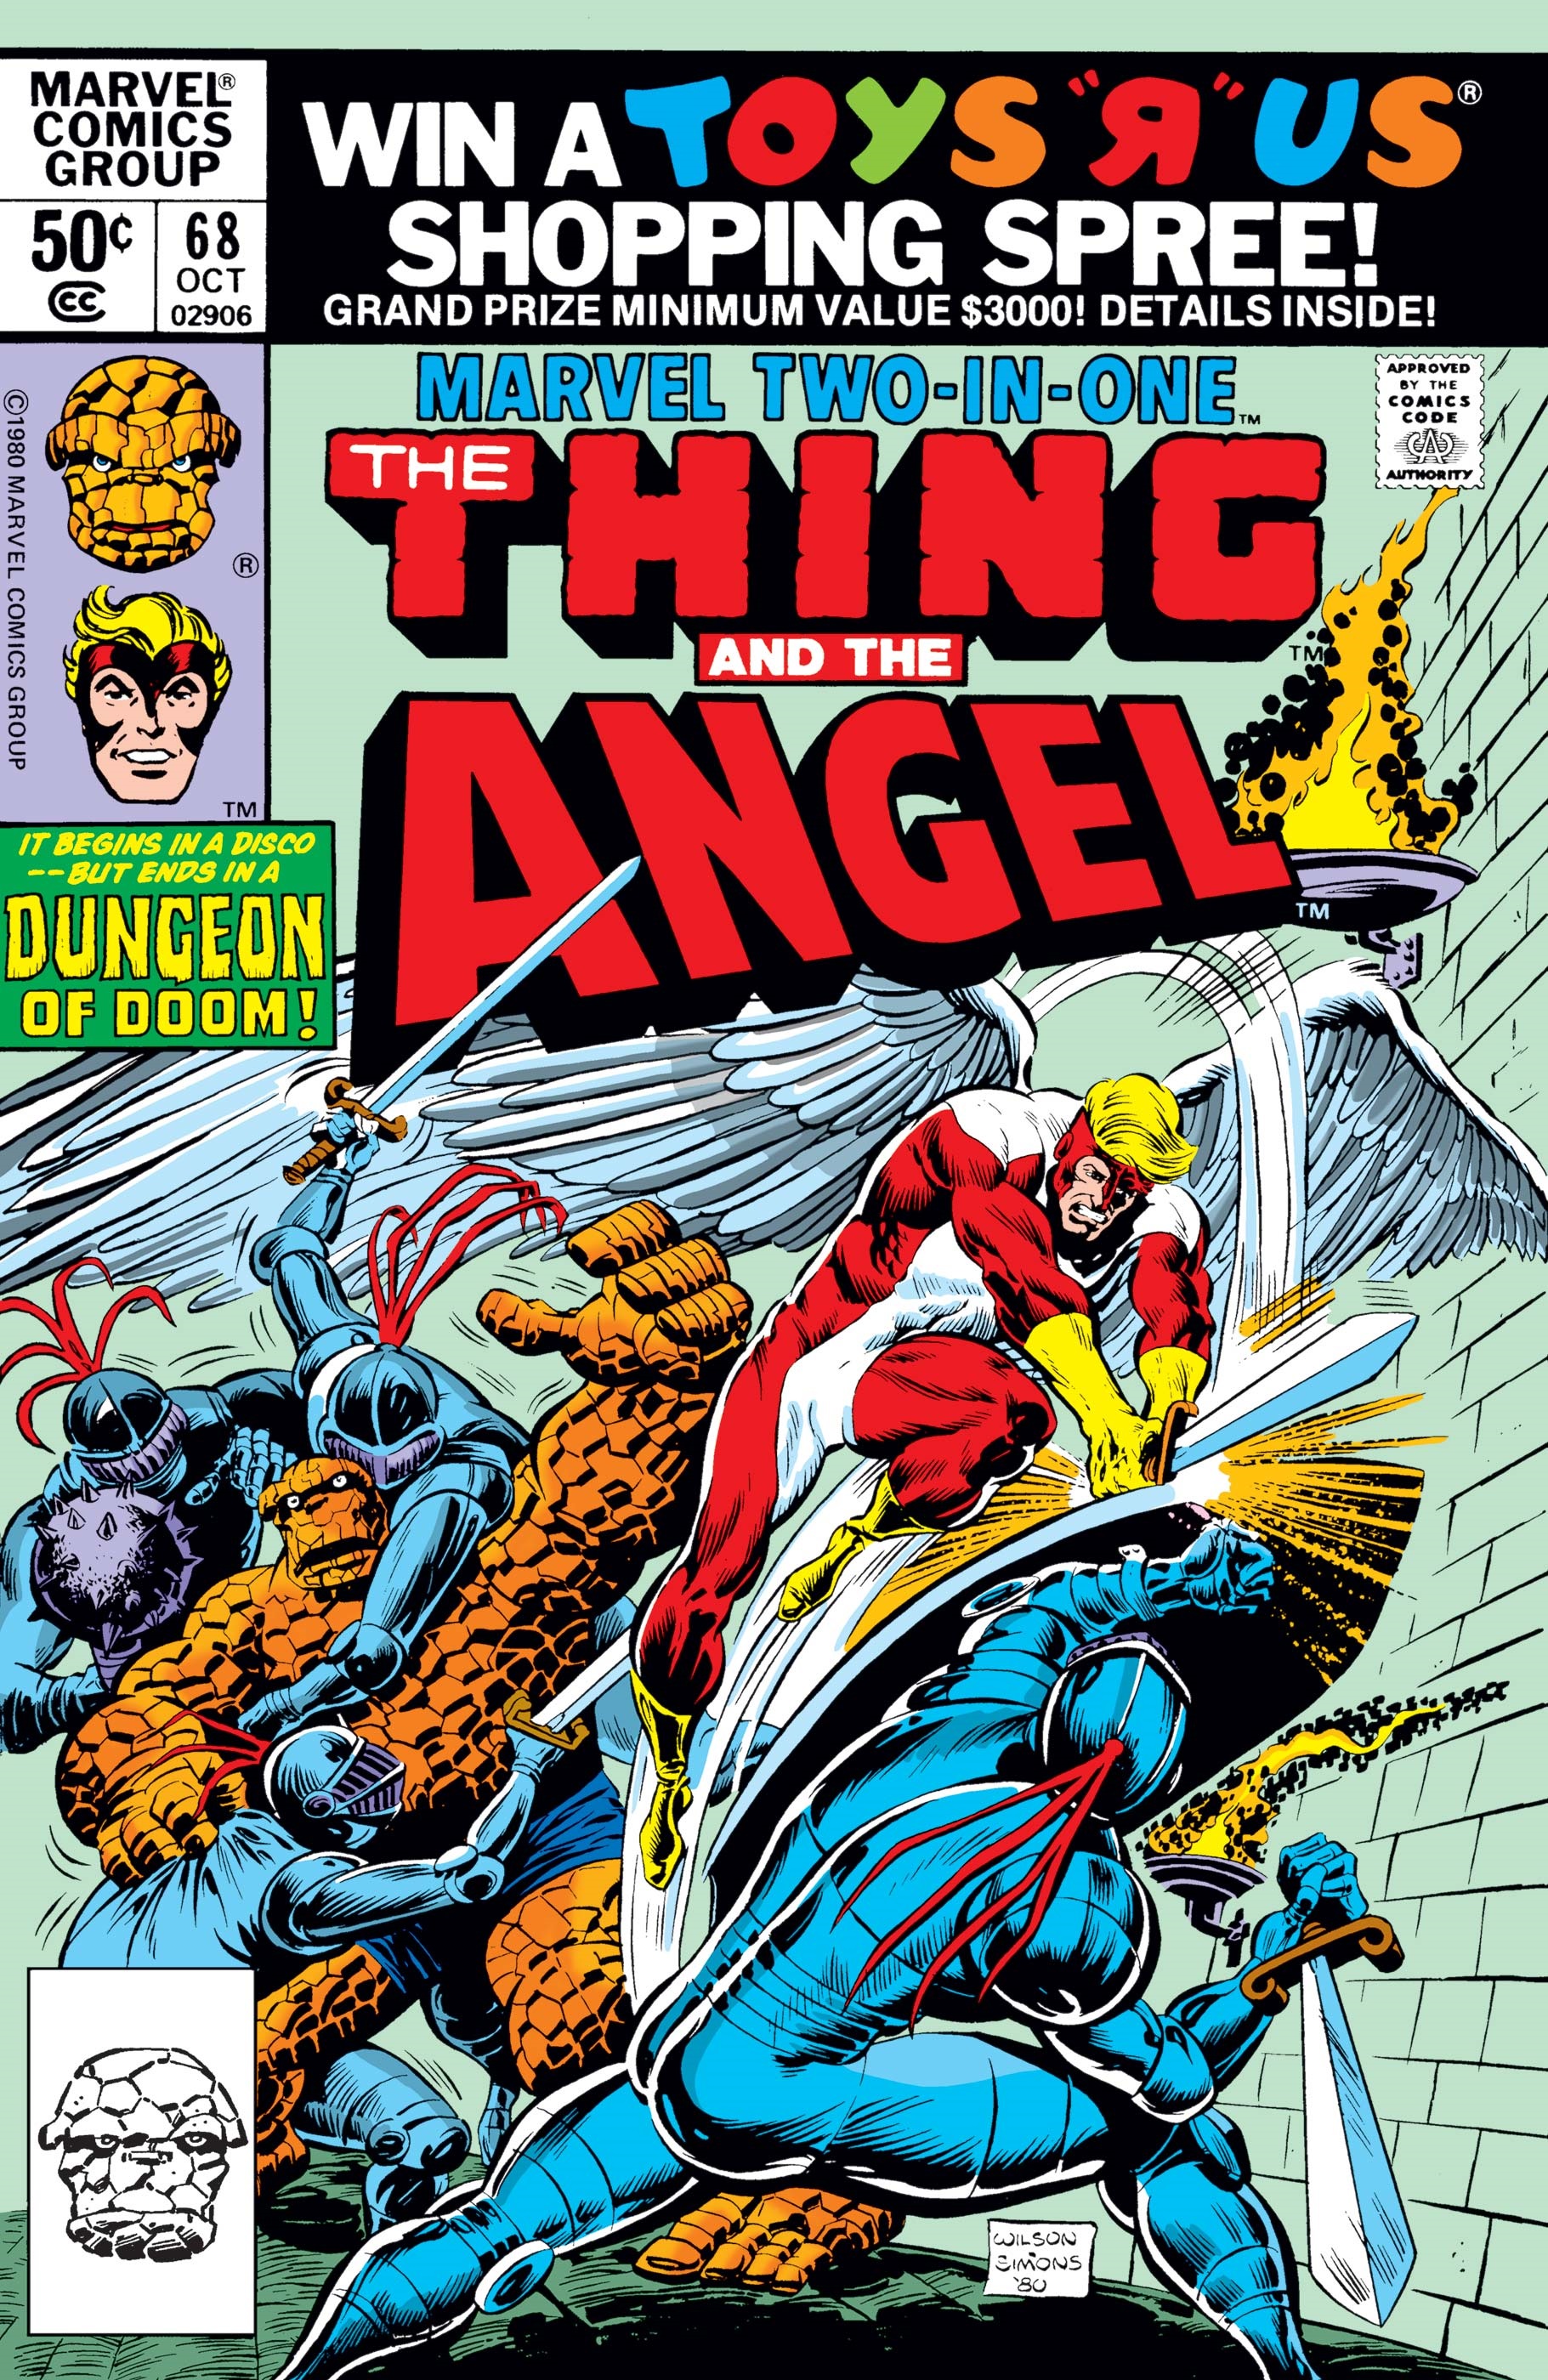 Marvel Two-in-One (1974) #68